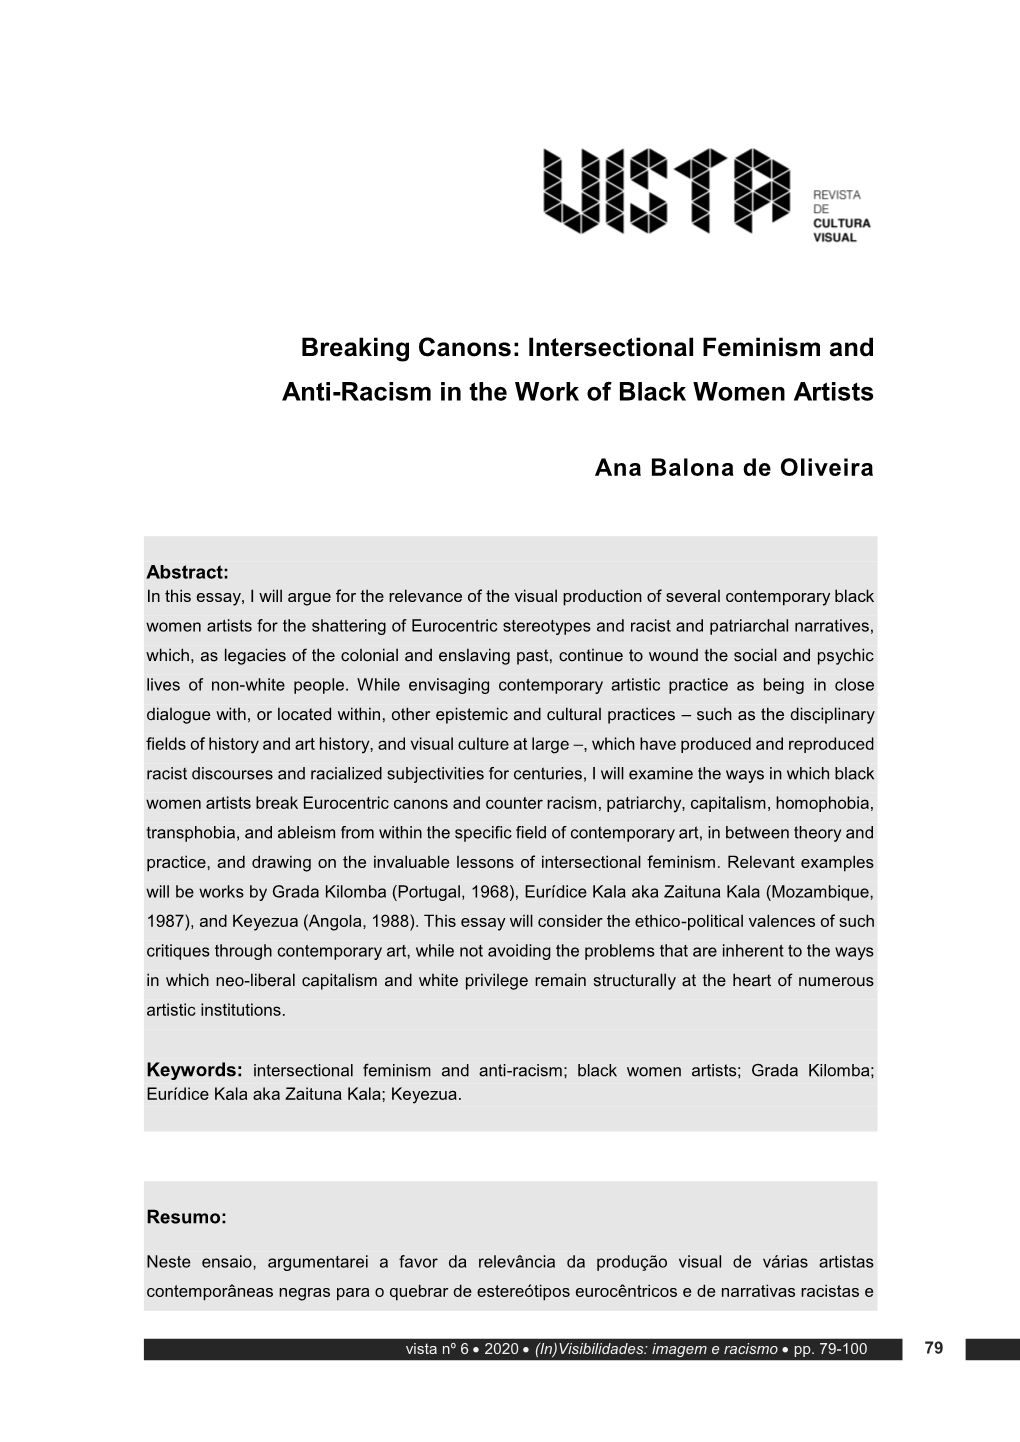 Intersectional Feminism and Anti-Racism in the Work of Black Women Artists